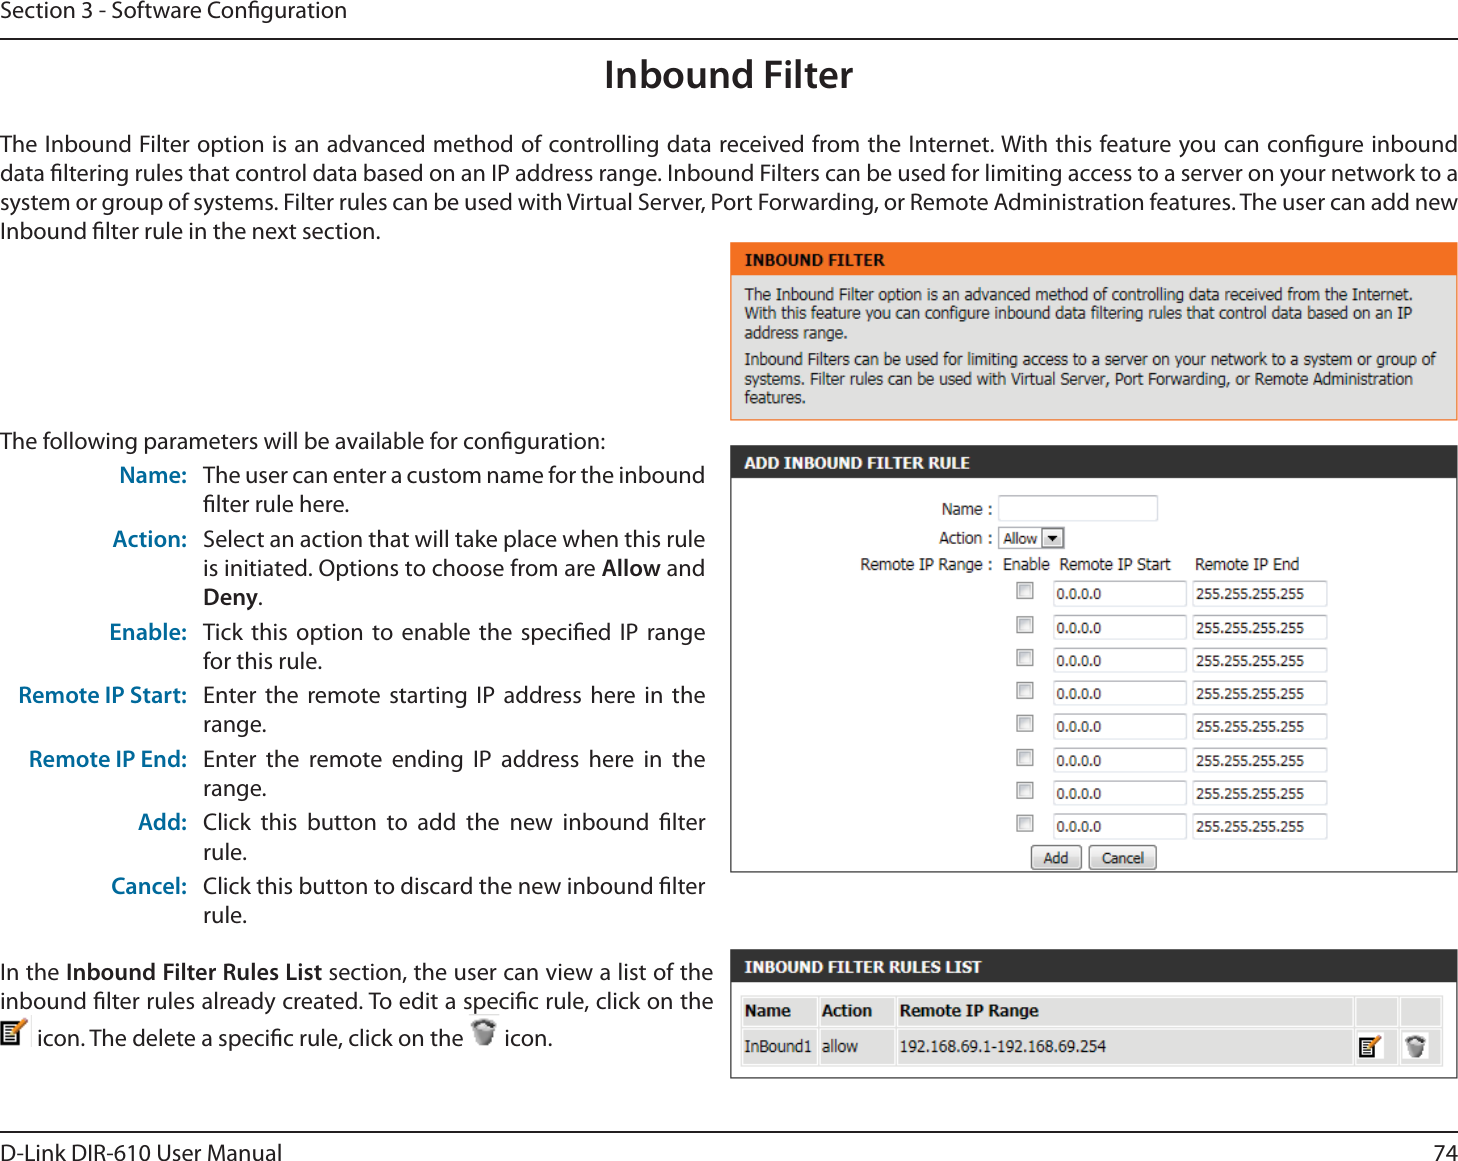 74D-Link DIR-610 User ManualSection 3 - Software CongurationInbound FilterThe Inbound Filter option is an advanced method of controlling data received from the Internet. With this feature you can congure inbound data ltering rules that control data based on an IP address range. Inbound Filters can be used for limiting access to a server on your network to a system or group of systems. Filter rules can be used with Virtual Server, Port Forwarding, or Remote Administration features. The user can add new Inbound lter rule in the next section.The following parameters will be available for conguration:Name: The user can enter a custom name for the inbound lter rule here.Action: Select an action that will take place when this rule is initiated. Options to choose from are Allow and Deny.Enable: Tick this option to enable the specied IP range for this rule.Remote IP Start: Enter the remote starting IP address here in the range.Remote IP End: Enter the remote ending IP address here in the range.Add: Click this button to add the new inbound lter rule.Cancel: Click this button to discard the new inbound lter rule.In the Inbound Filter Rules List section, the user can view a list of the inbound lter rules already created. To edit a specic rule, click on the  icon. The delete a specic rule, click on the   icon.